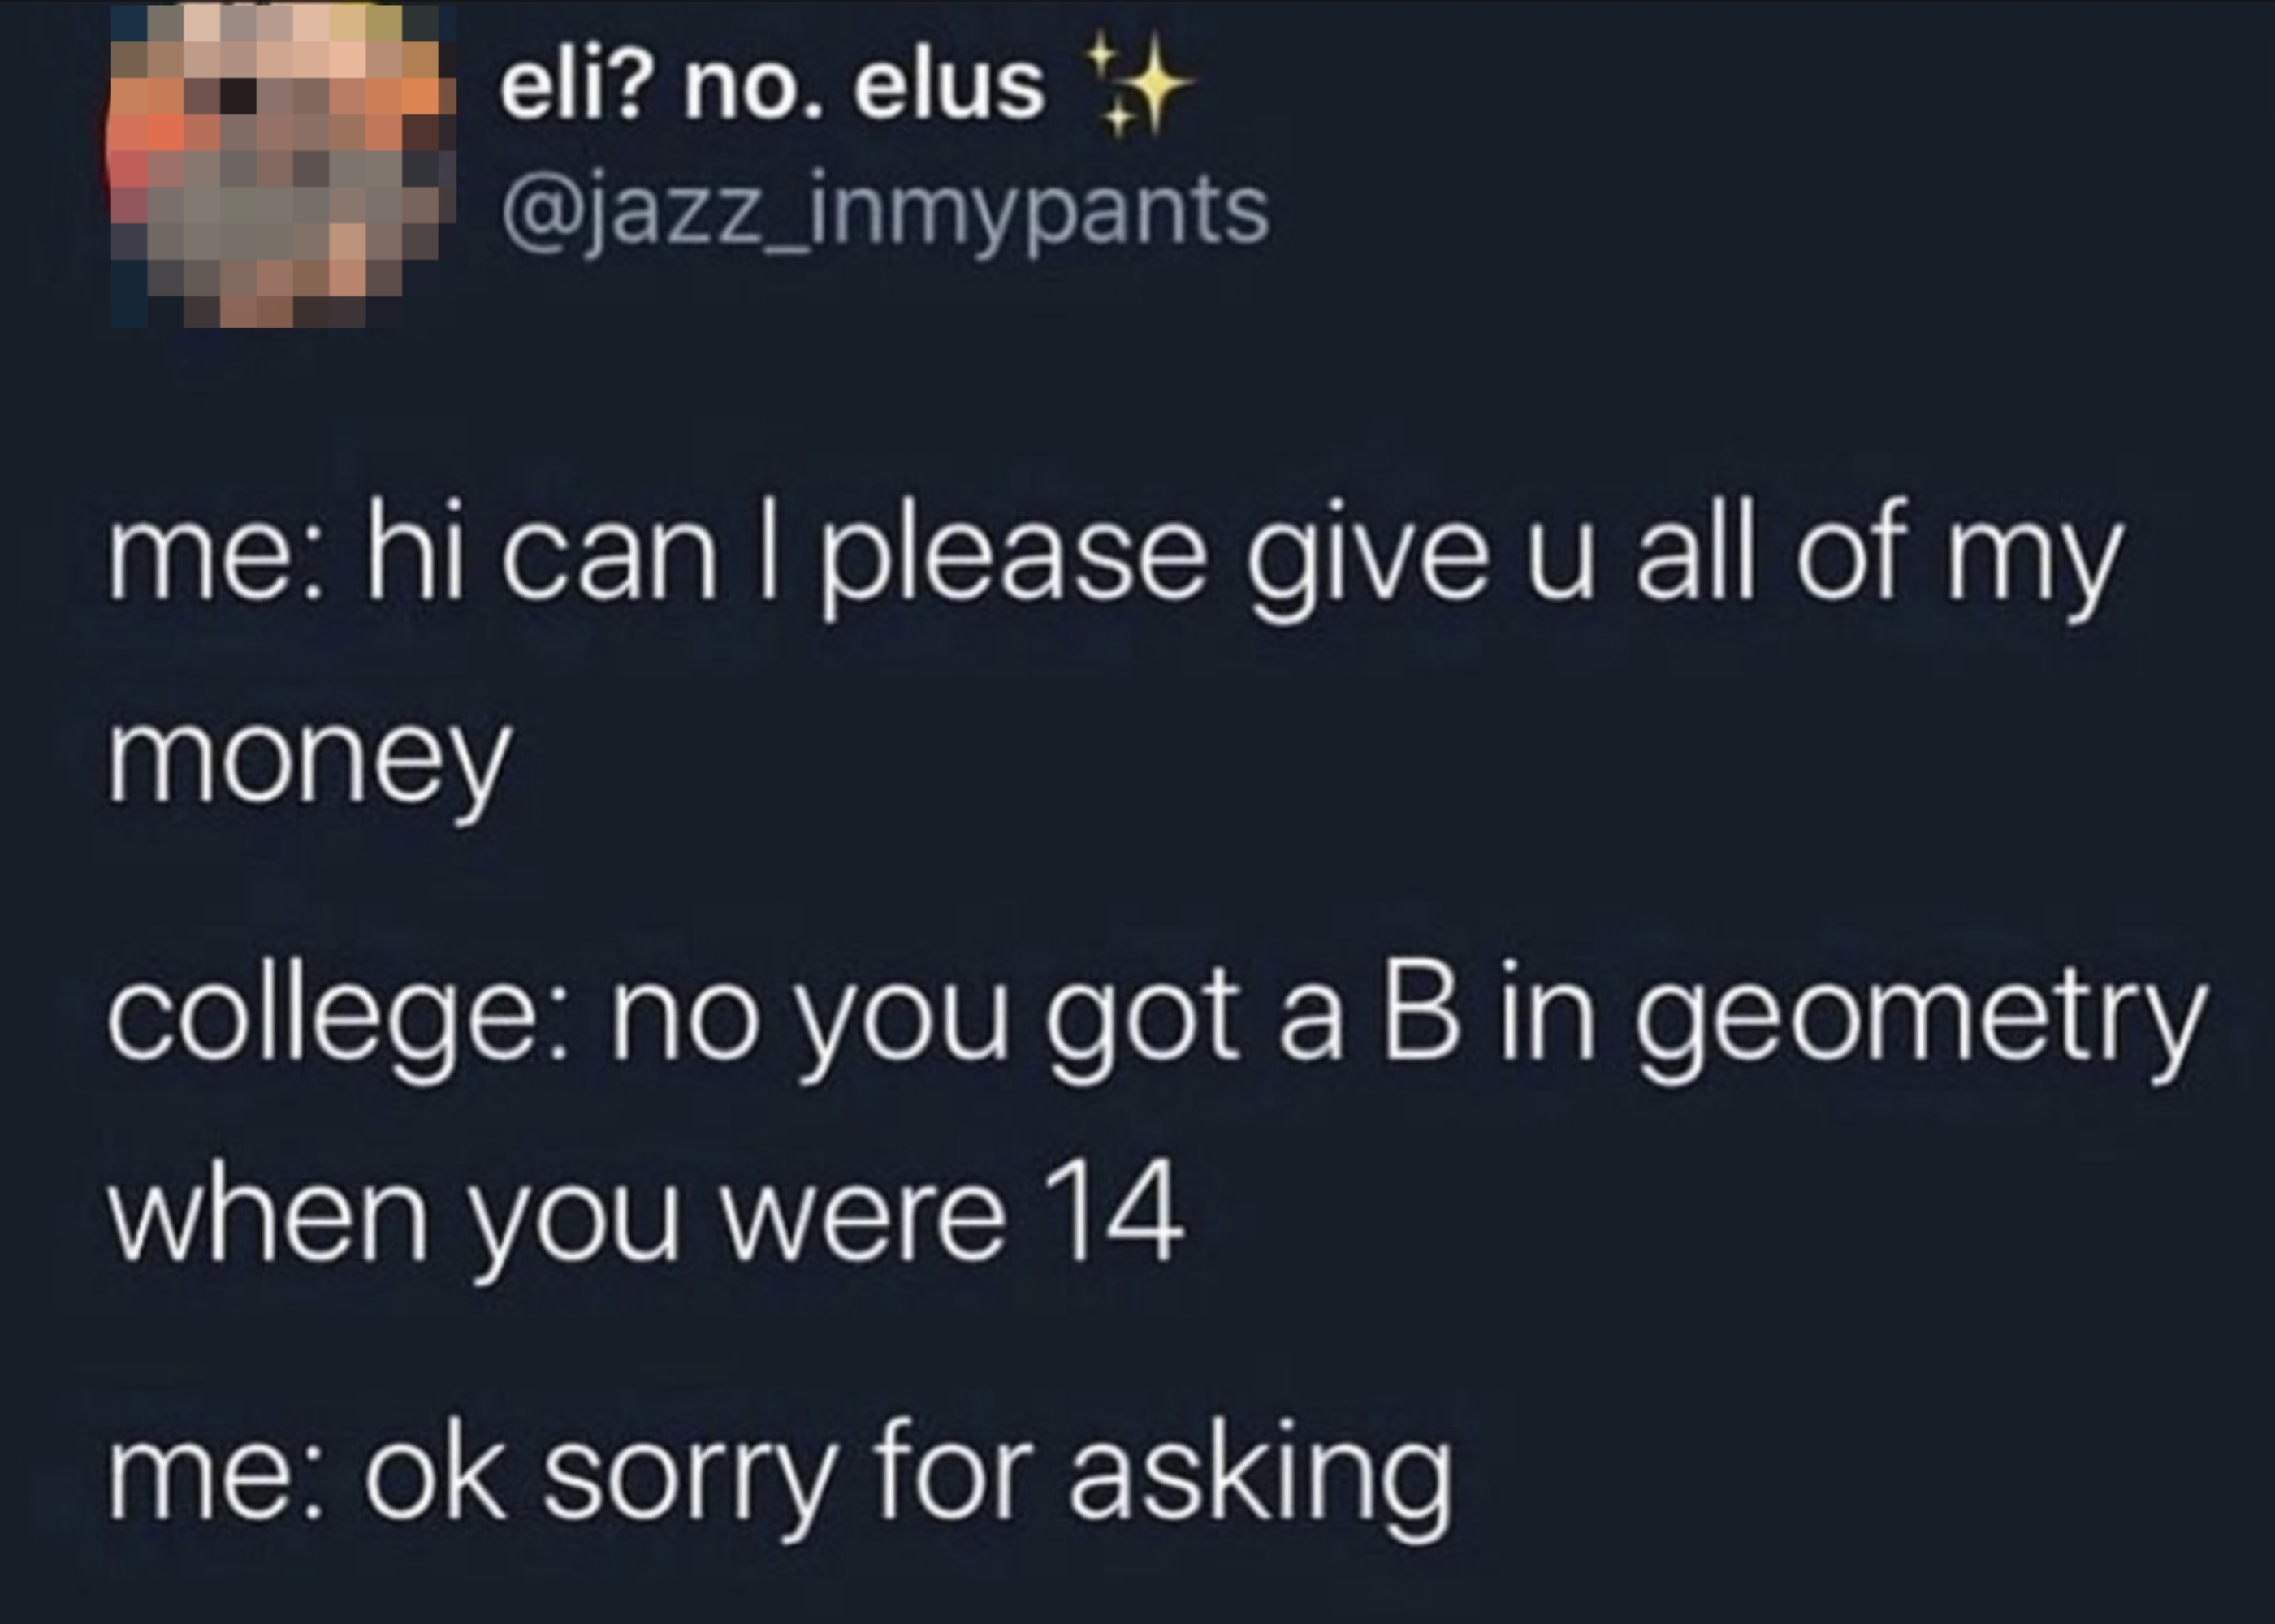 A screenshot of a humorous tweet about college rejection based on a past grade, with two people conversing